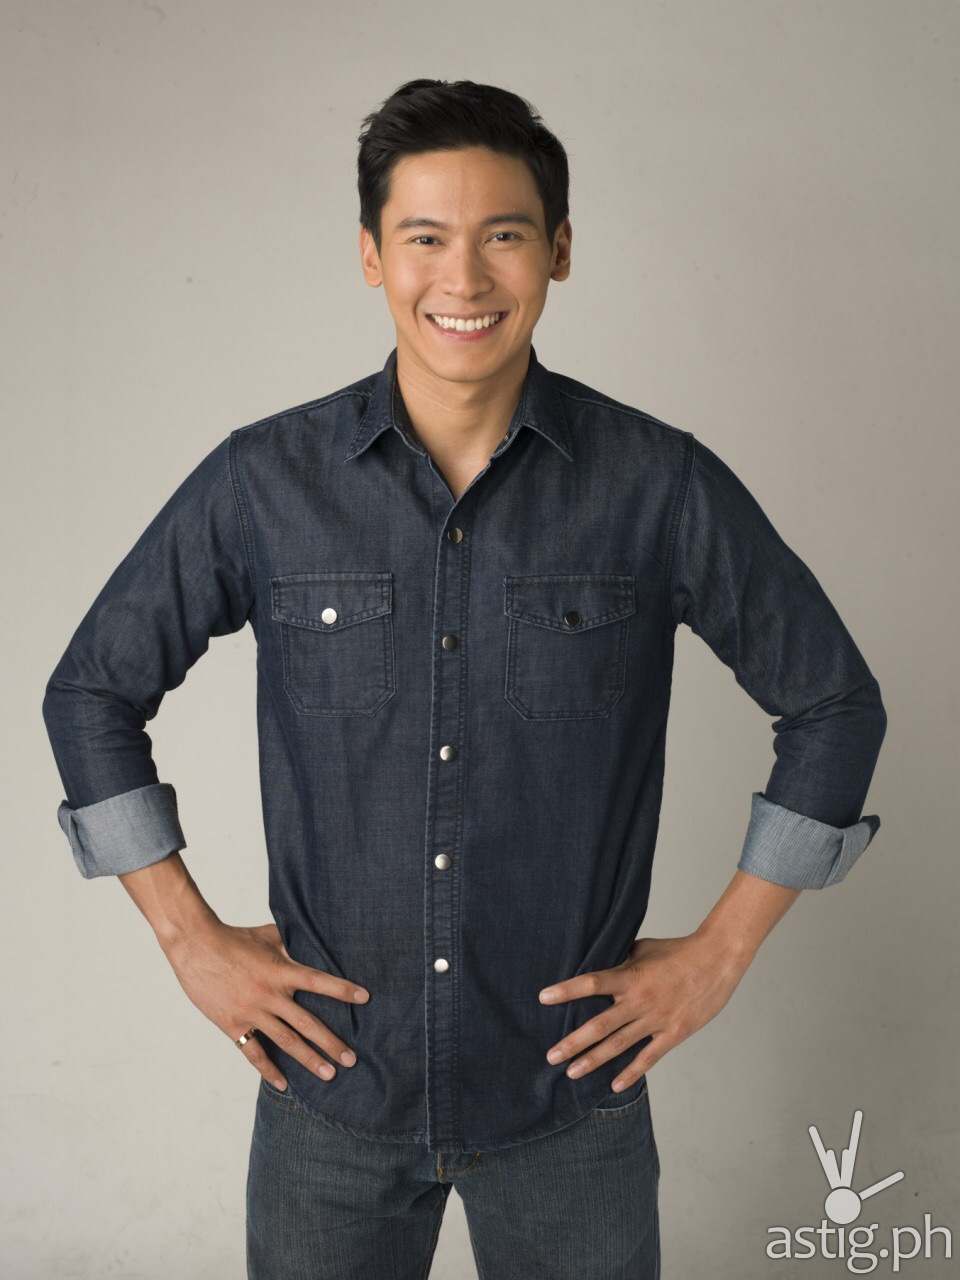 Actor Enchong Dee is the official endorser of Peri-Peri Charcoal Chicken and Sauce Bar. He is also a Peri Happy Franchisee of several Peri-Peri branches.